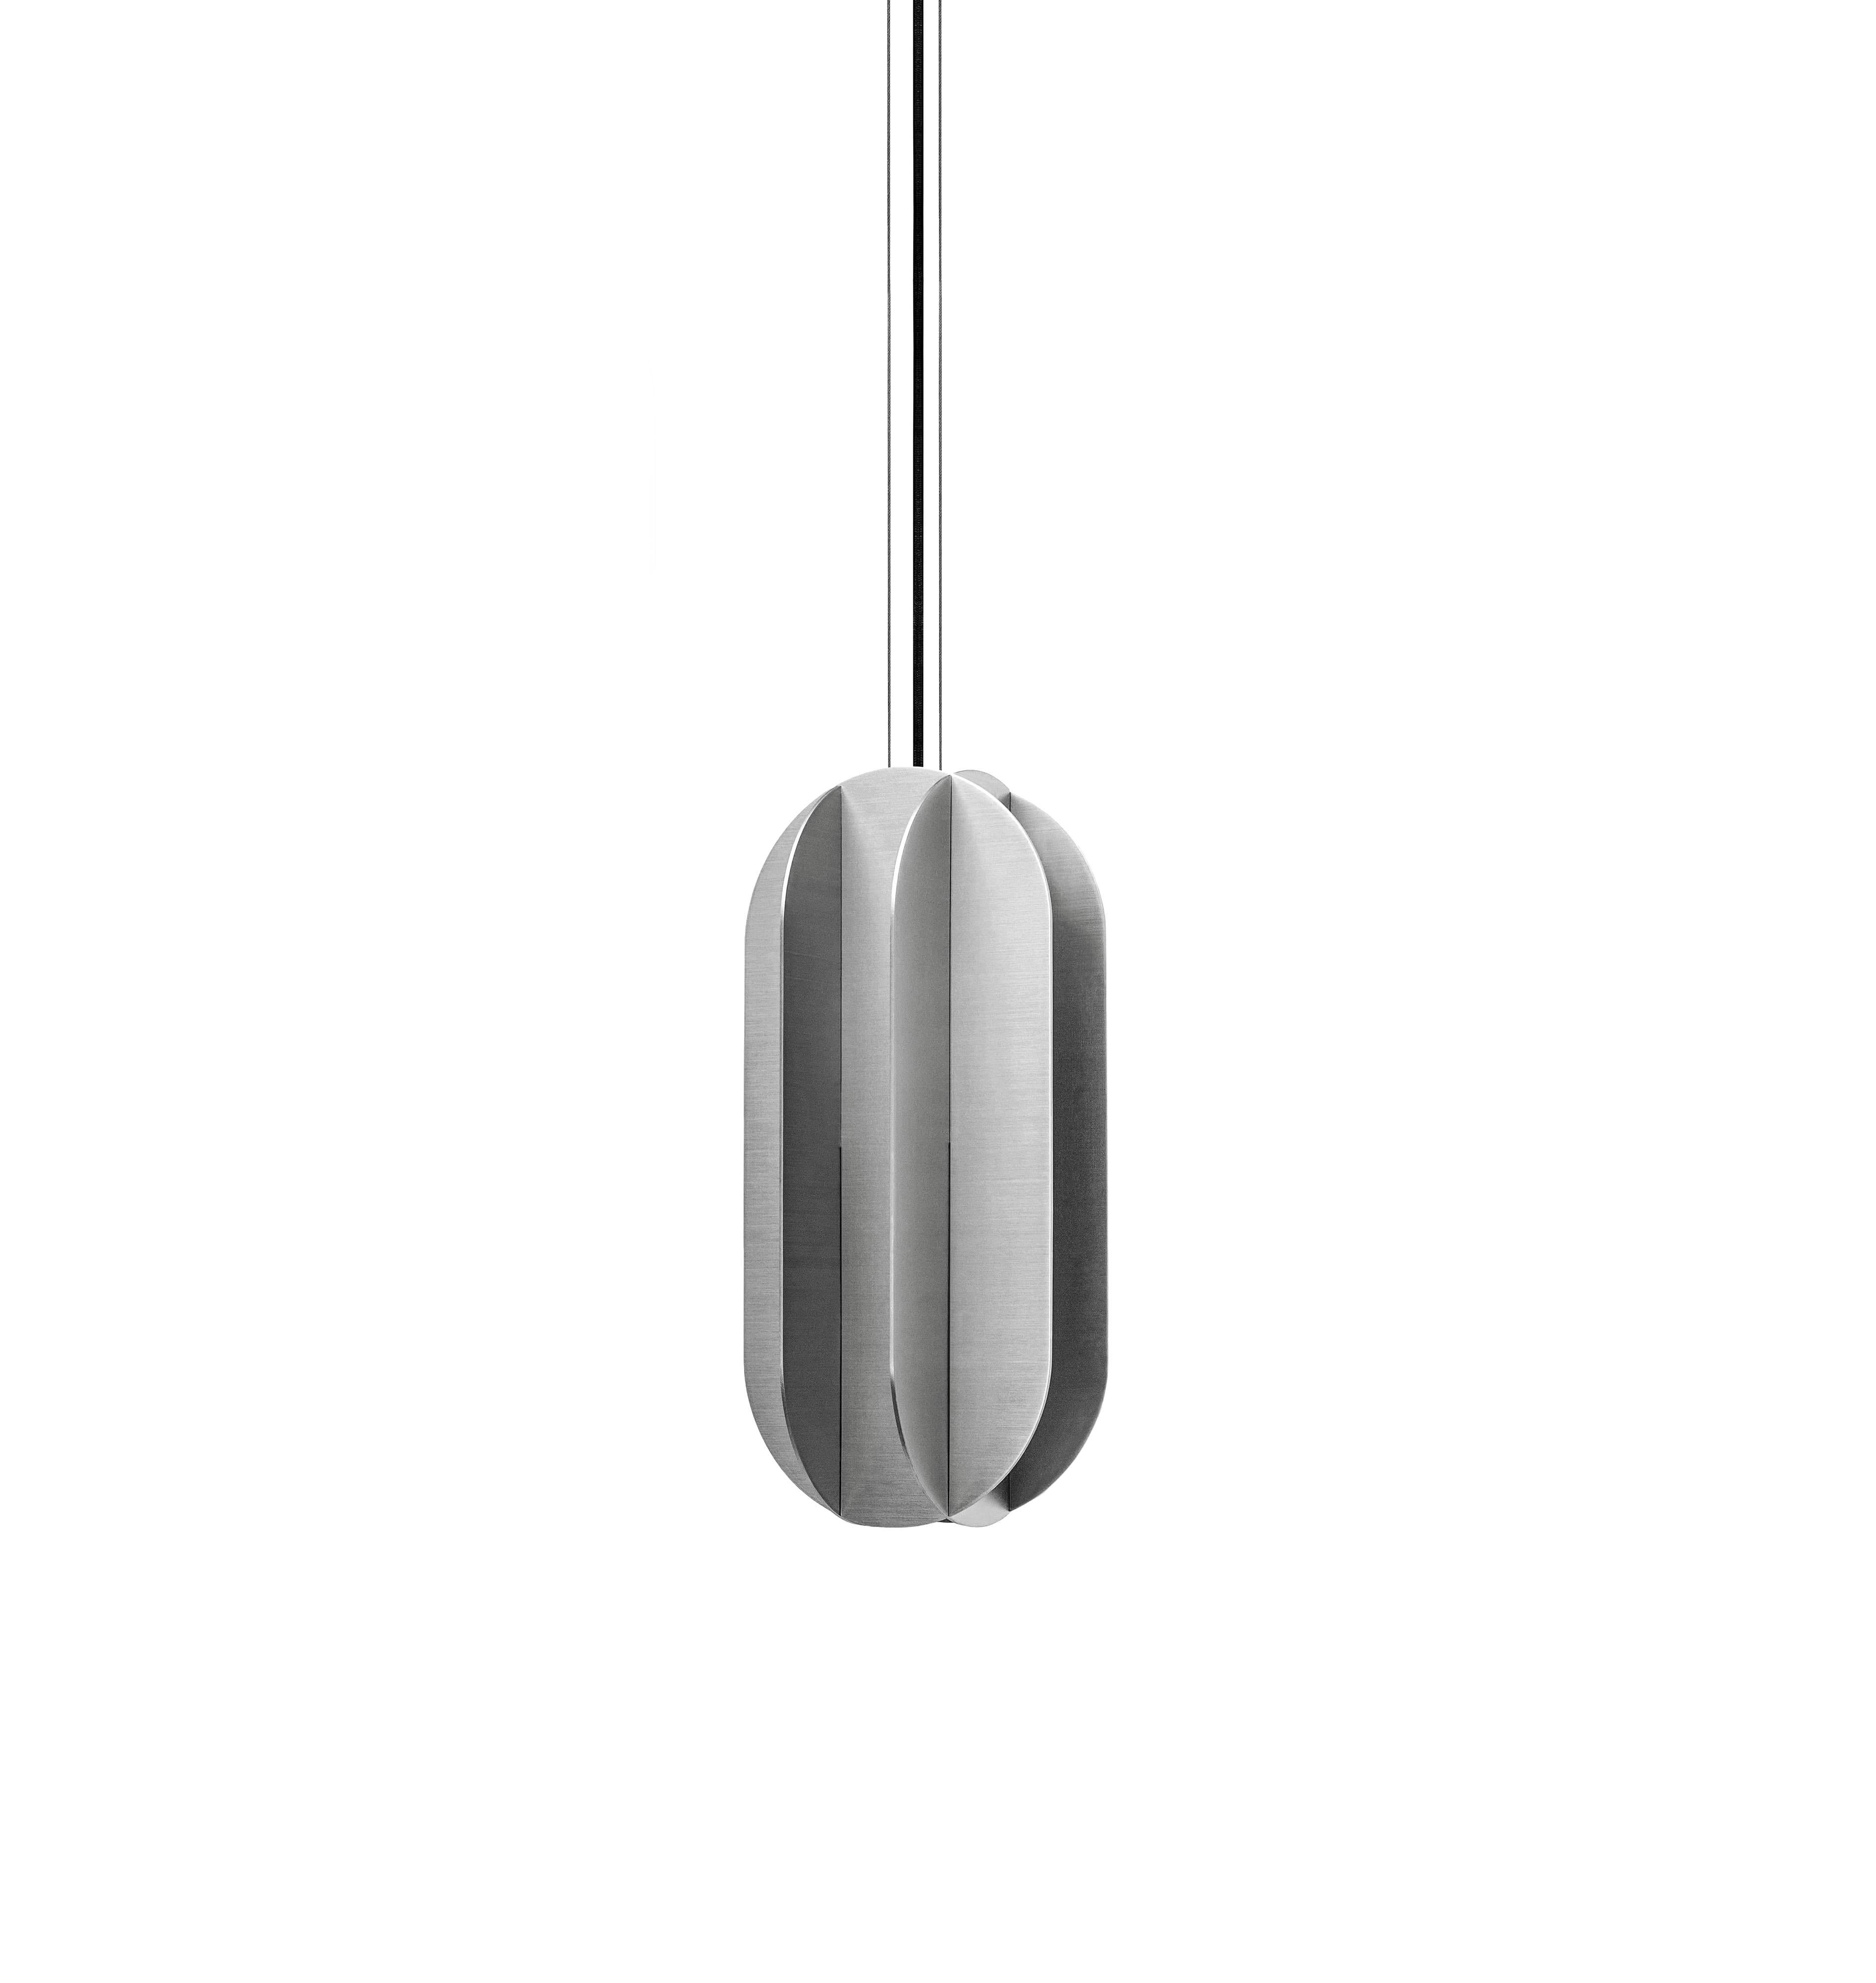 Modern Set of Three Contemporary Pendant Lamp El Lamps CS3 by Noom in Stainless Steel